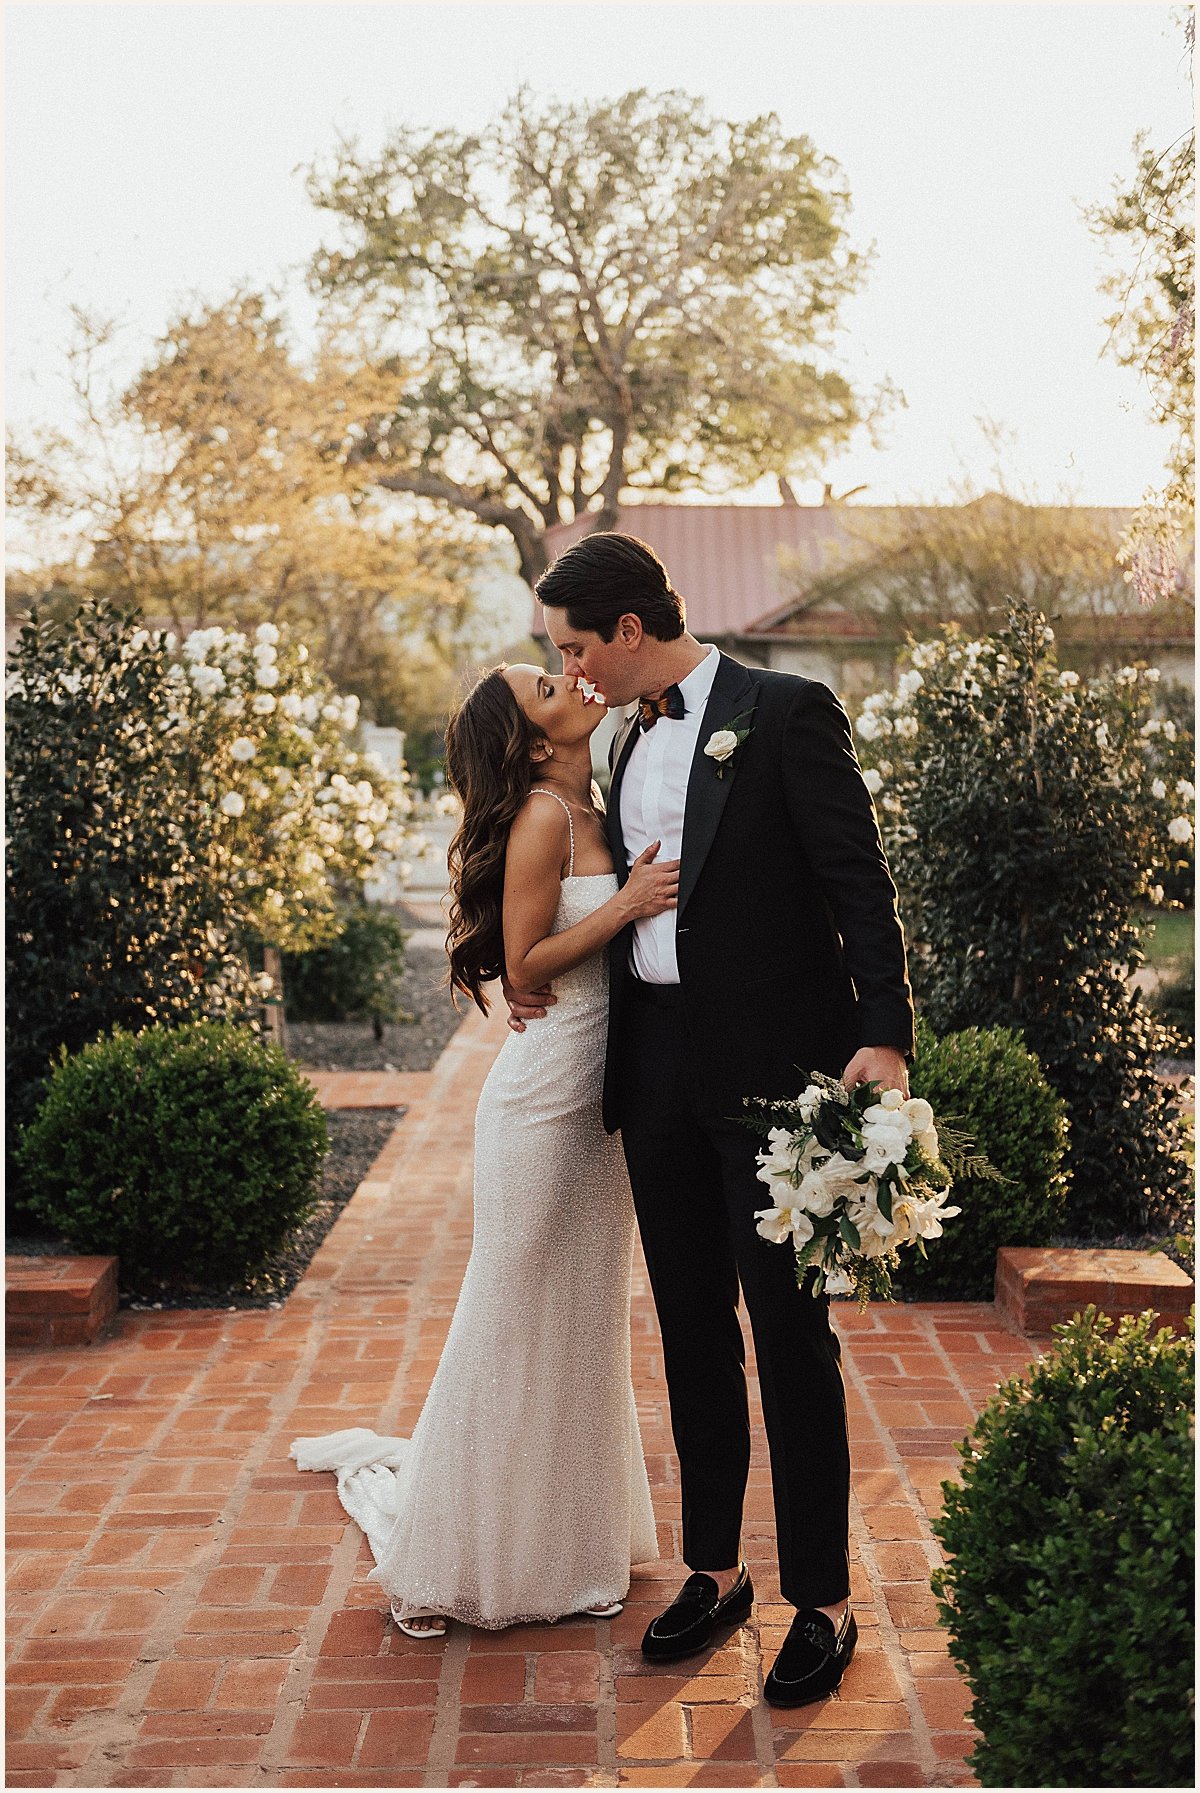 Sexy and romantic bride and groom portraits on wedding day | Luxury Wedding Photographer | Lauren Parr Photography